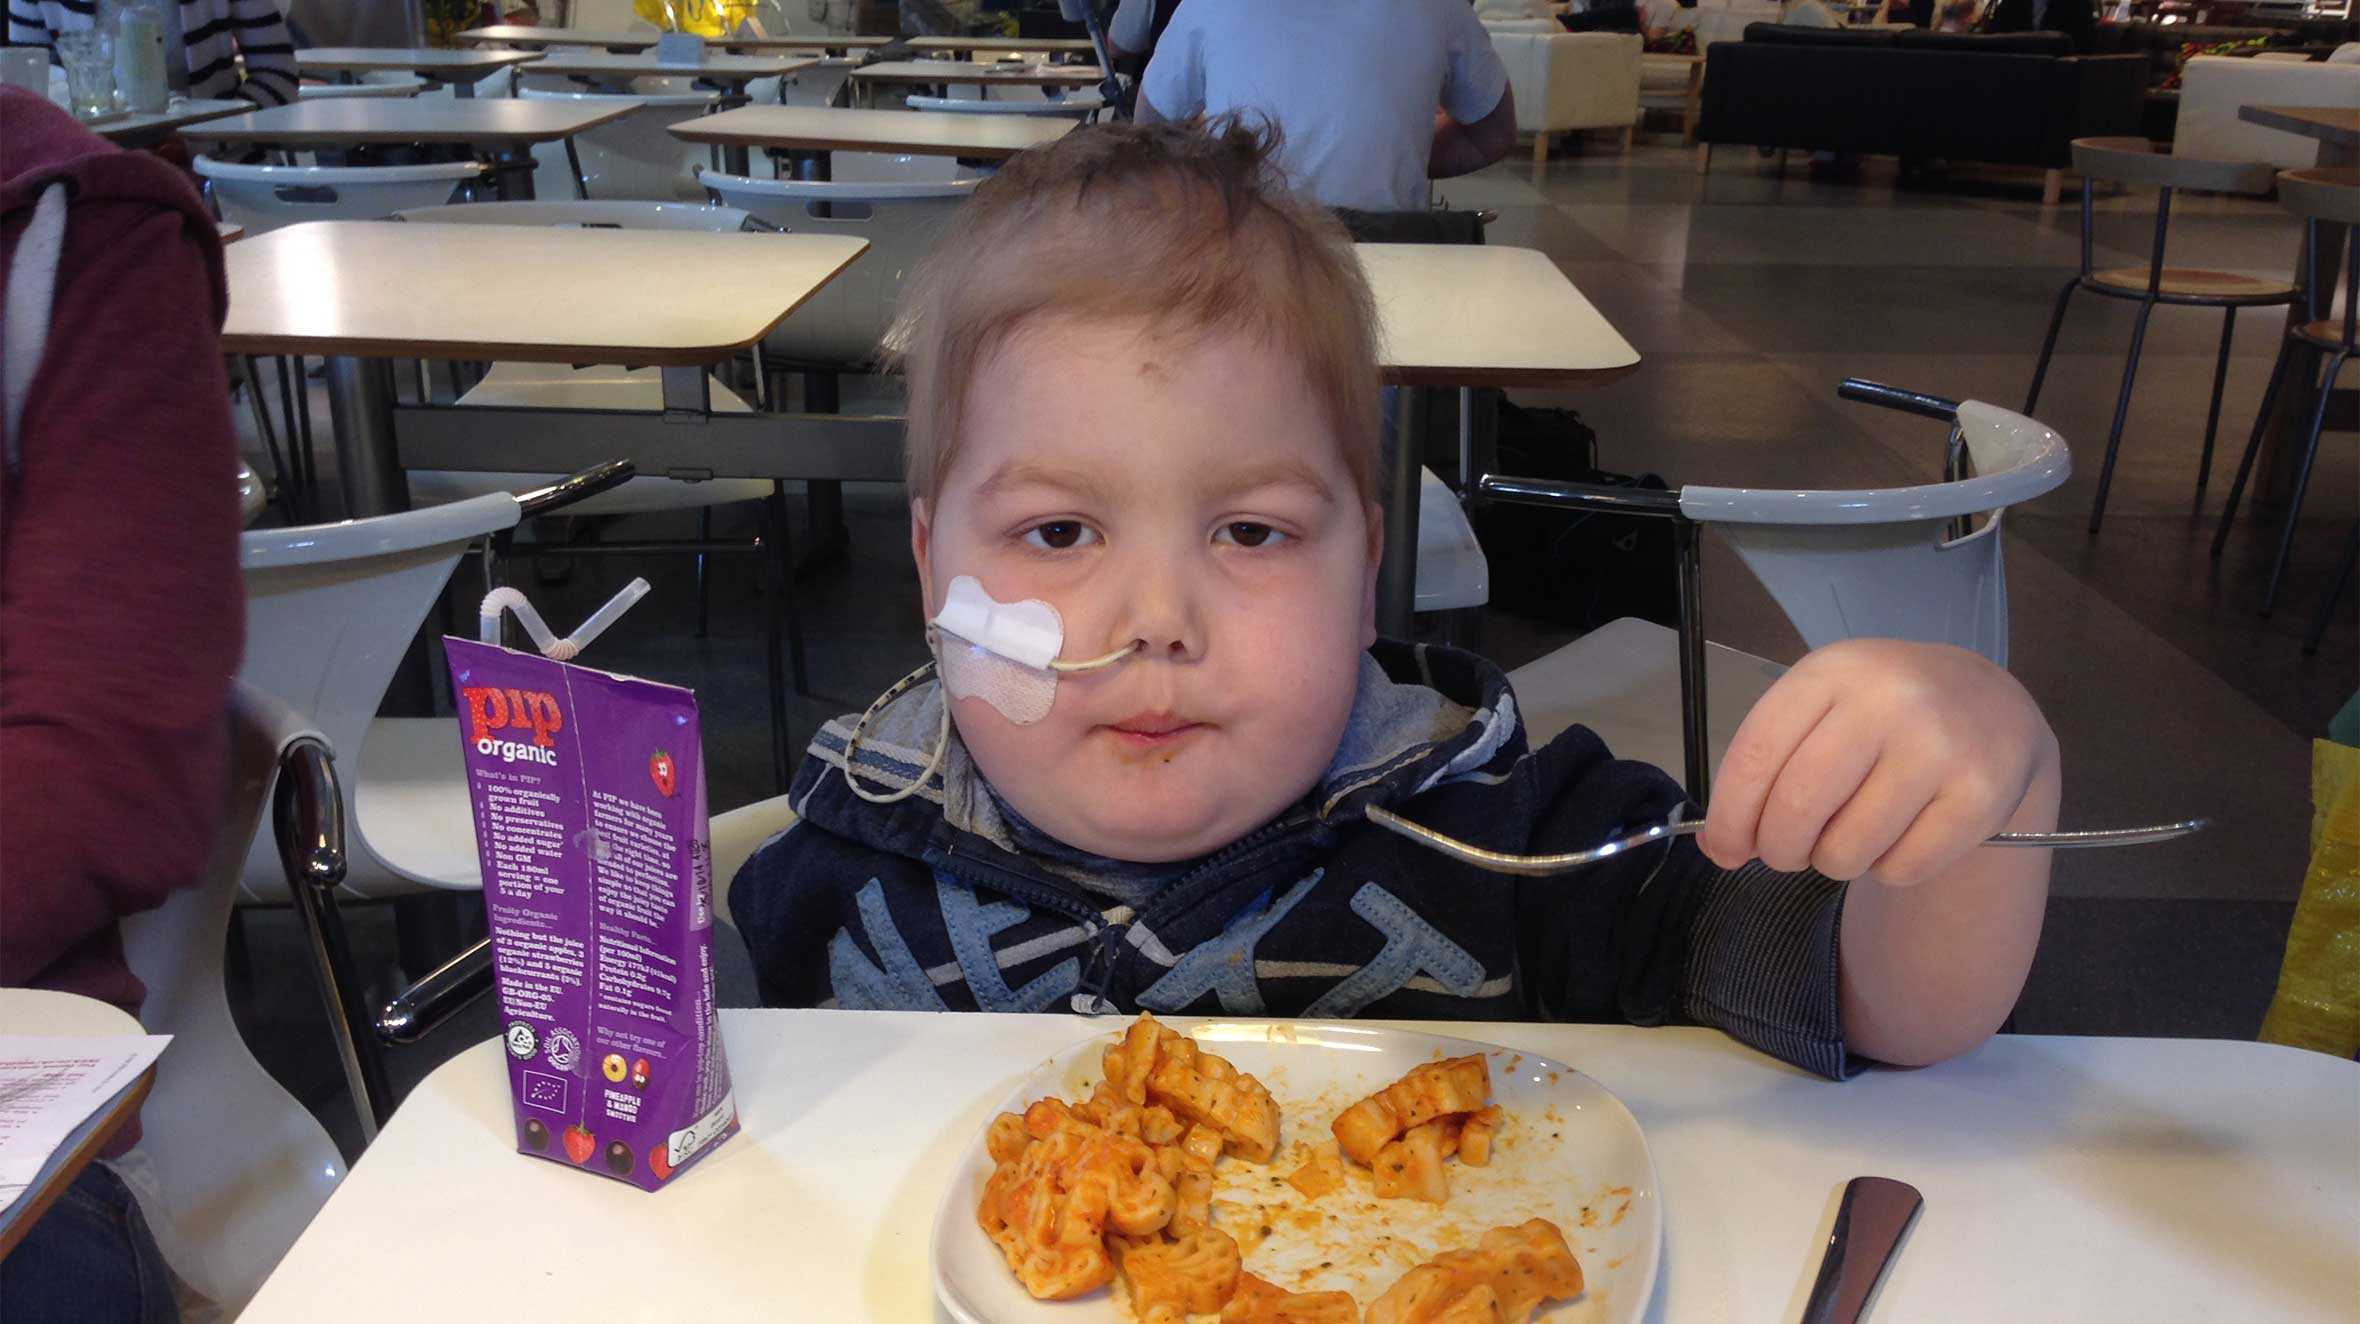 Jacob eating in the hospital canteen while undergoing treatment